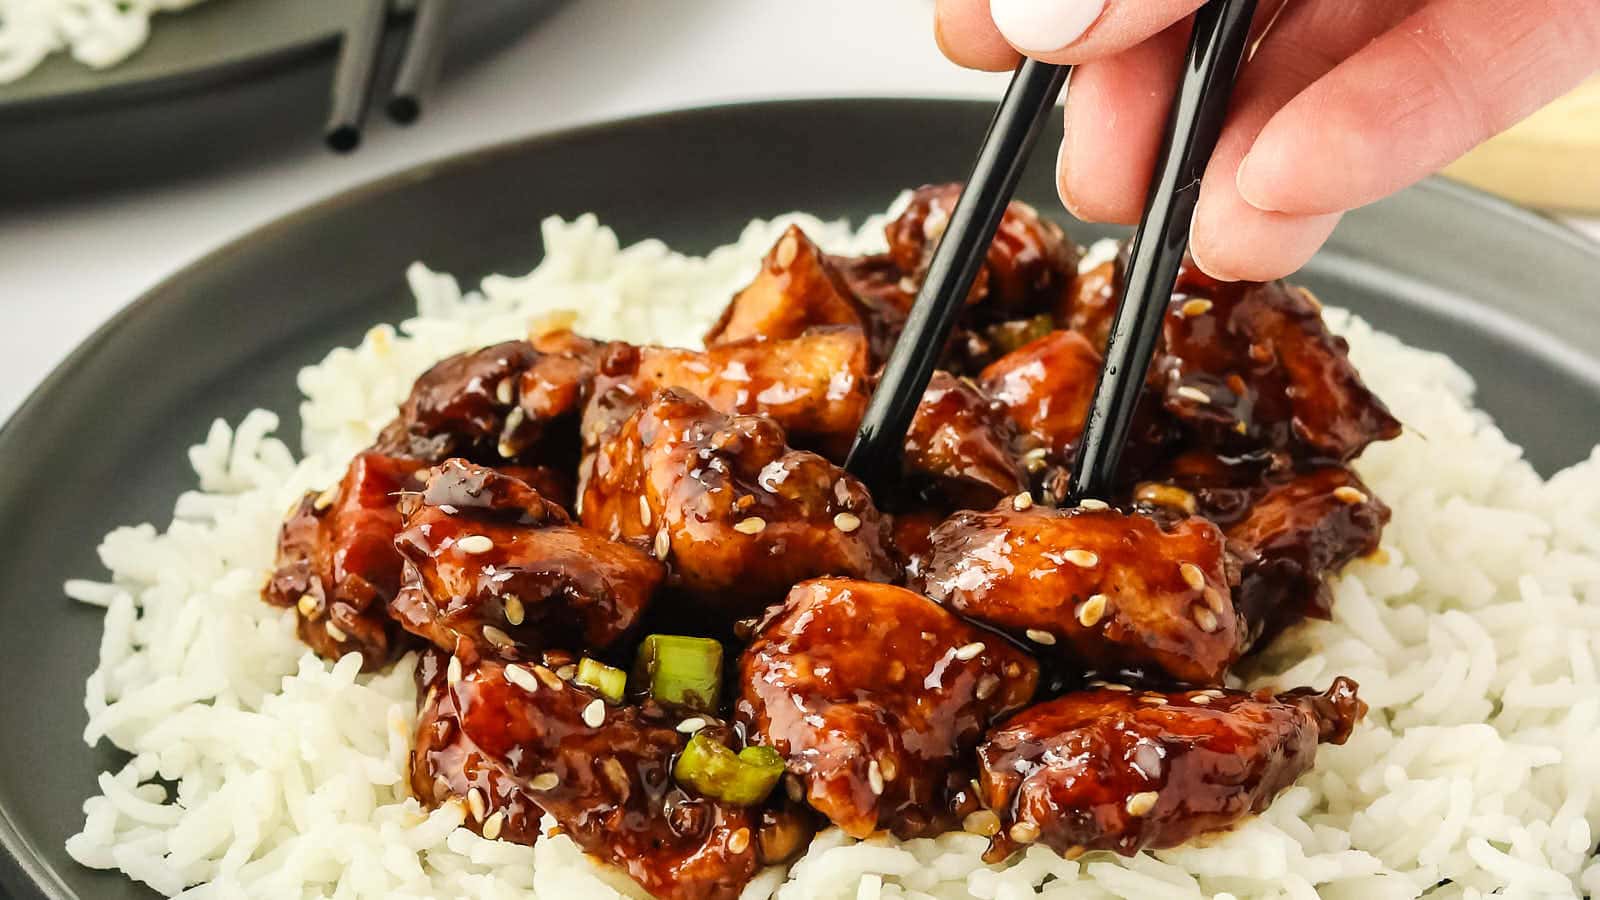 Sesame Chicken recipe by Cheerful Cook.